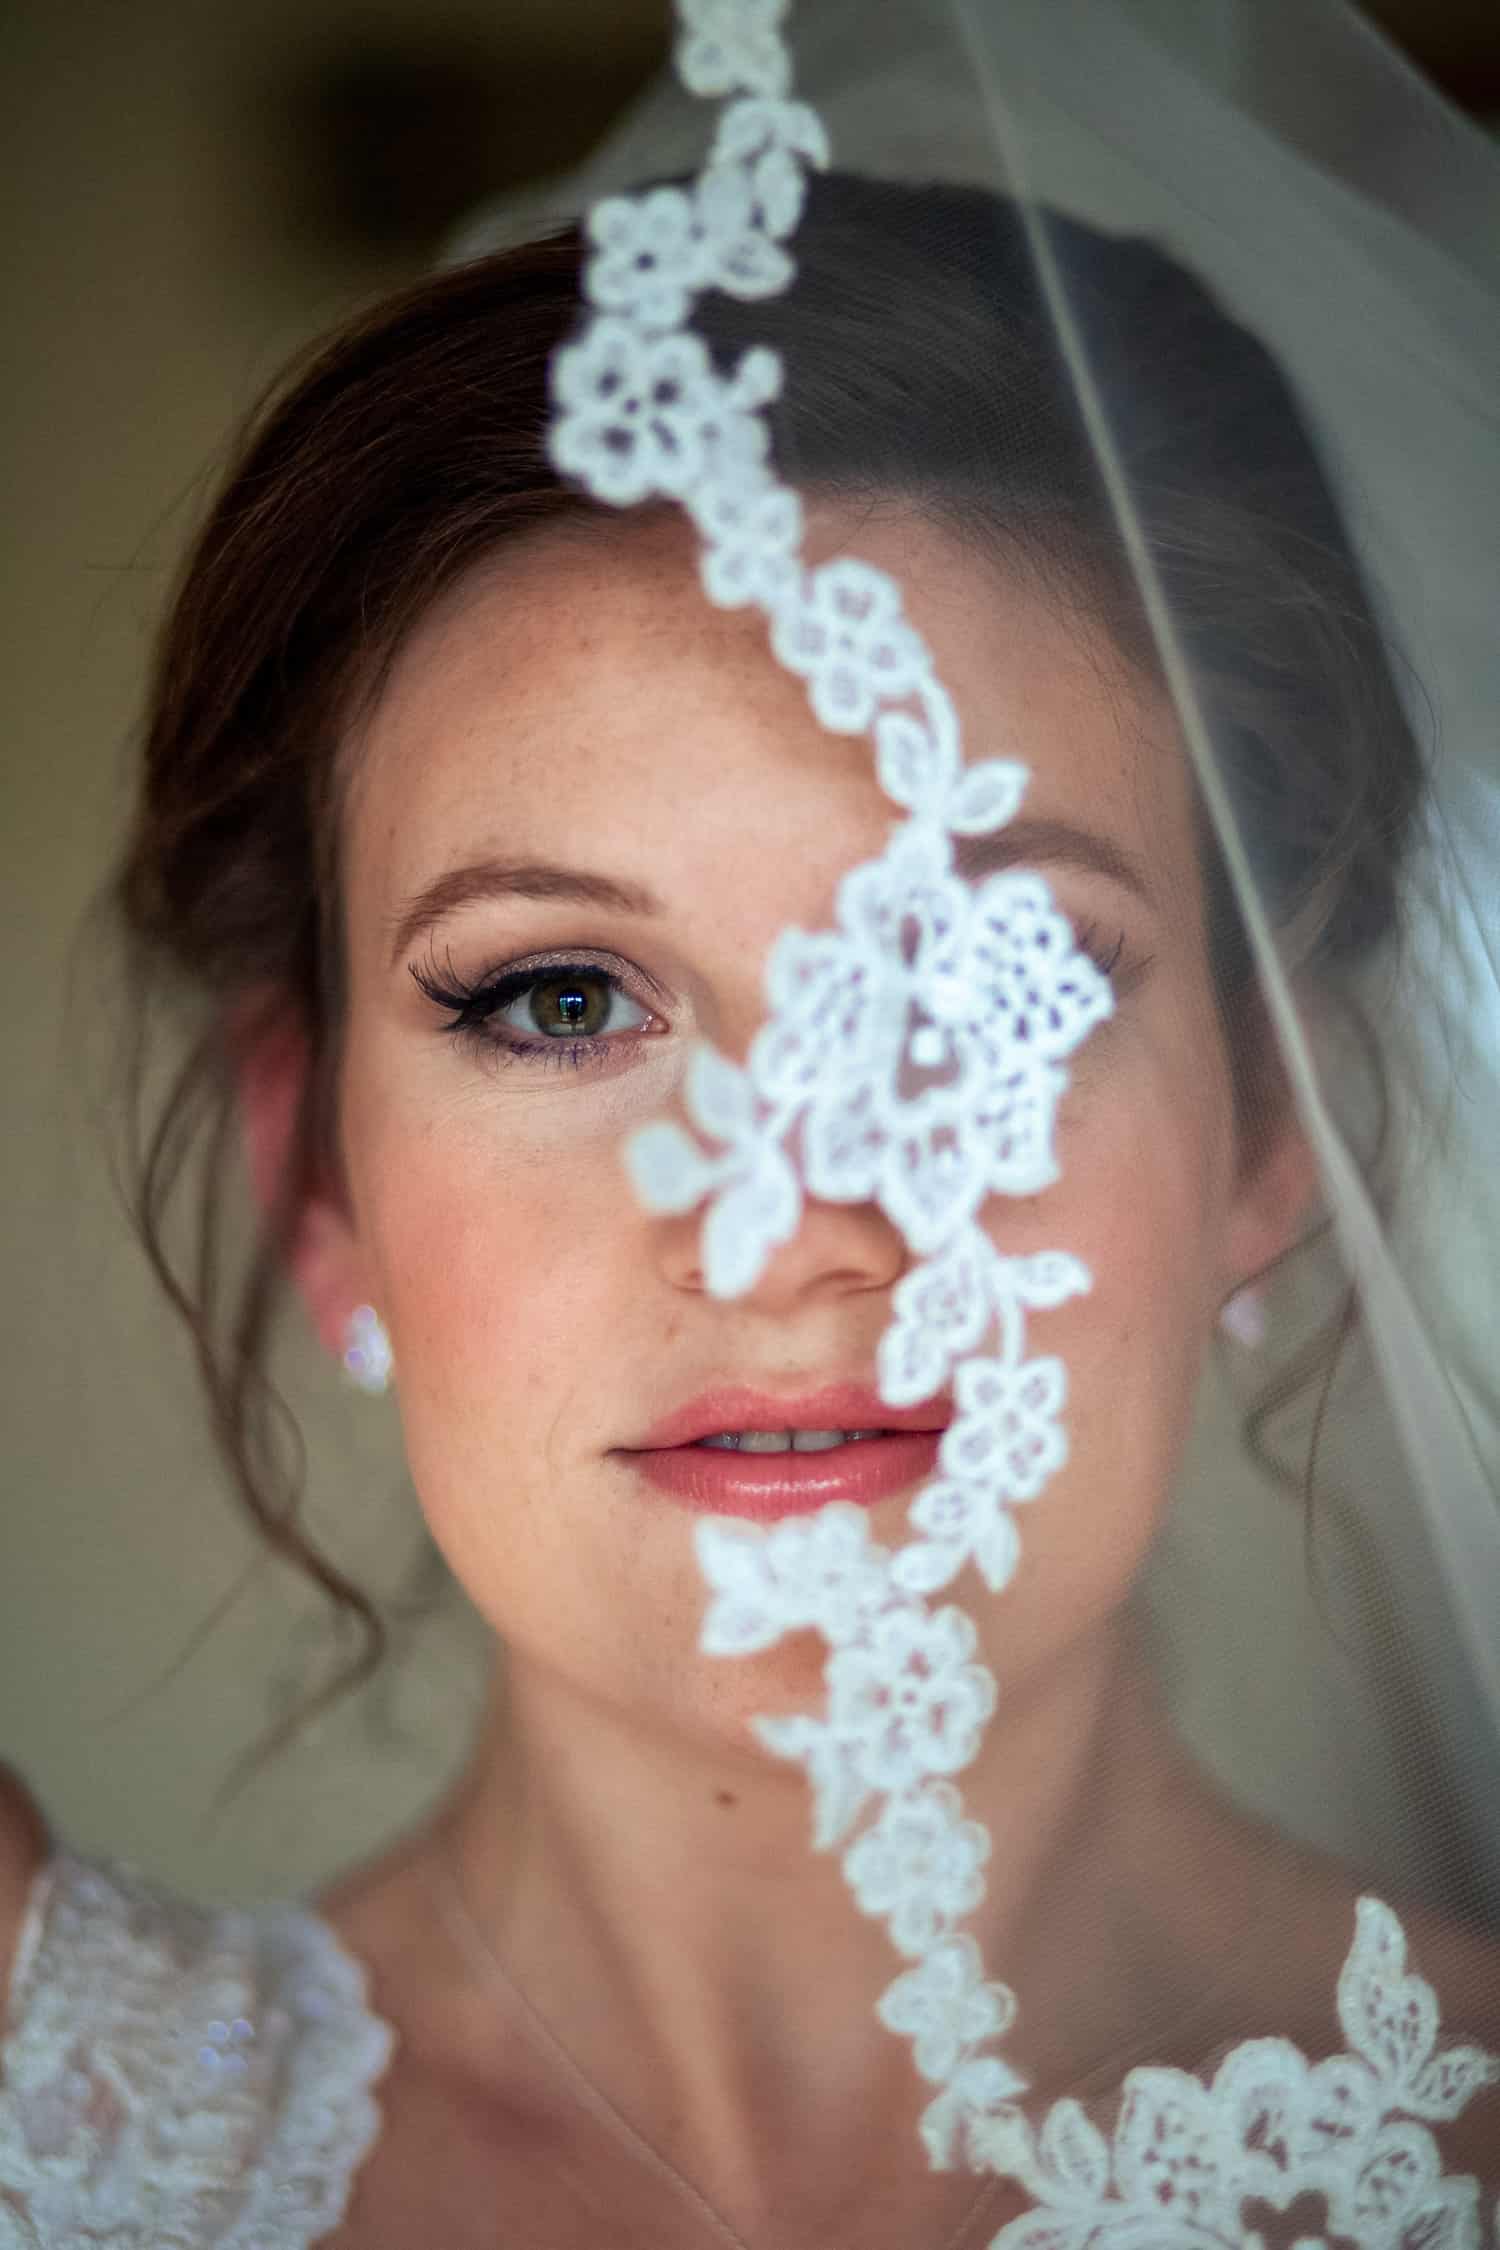 A bride with a veil covering her face.